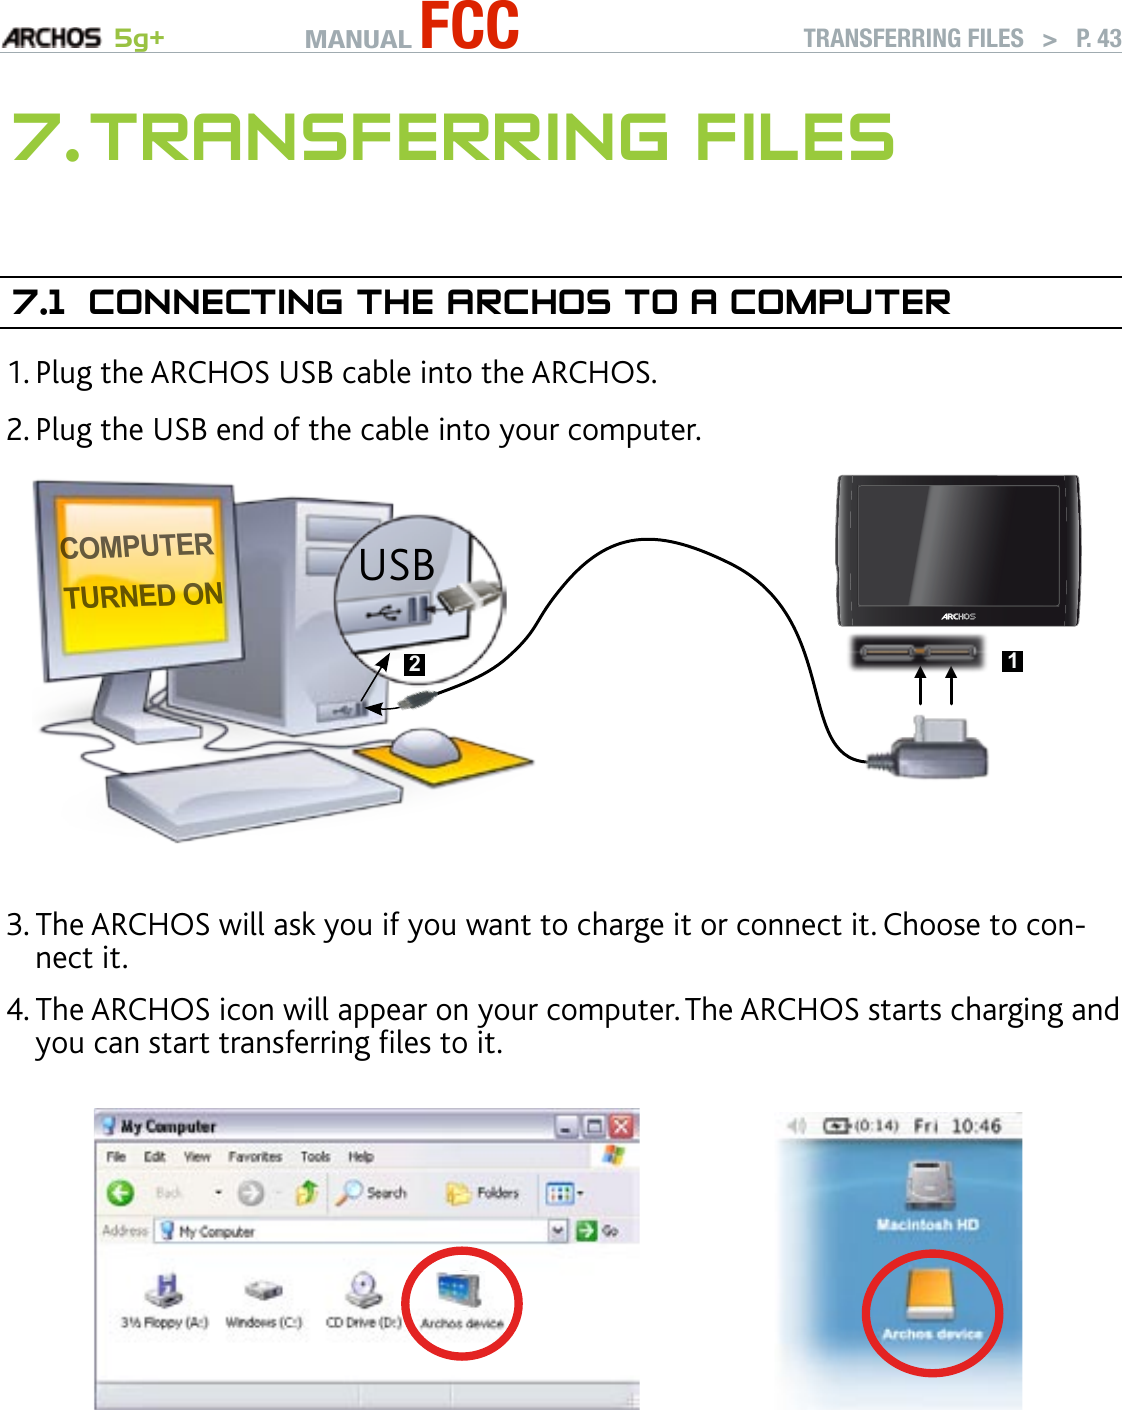 MANUAL FCC 5g+ TRANSFERRING FILES   &gt;   P. 437. TransferrIng fIles7.1  COnneCTIng The arChOs TO a COMPuTerPlug the ARCHOS USB cable into the ARCHOS.Plug the USB end of the cable into your computer.Computerturned onUSB 21▲ ▲The ARCHOS will ask you if you want to charge it or connect it. Choose to con-nect it. The ARCHOS icon will appear on your computer. The ARCHOS starts charging and you can start transferring les to it.If you do not have Windows Media® Player 10 or higher installed on your com-puter, the ARCHOS will ask you if you want to charge its battery or connect it as a mass storage device (Hard Drive). Choose to connect it. 1.2.3.4.